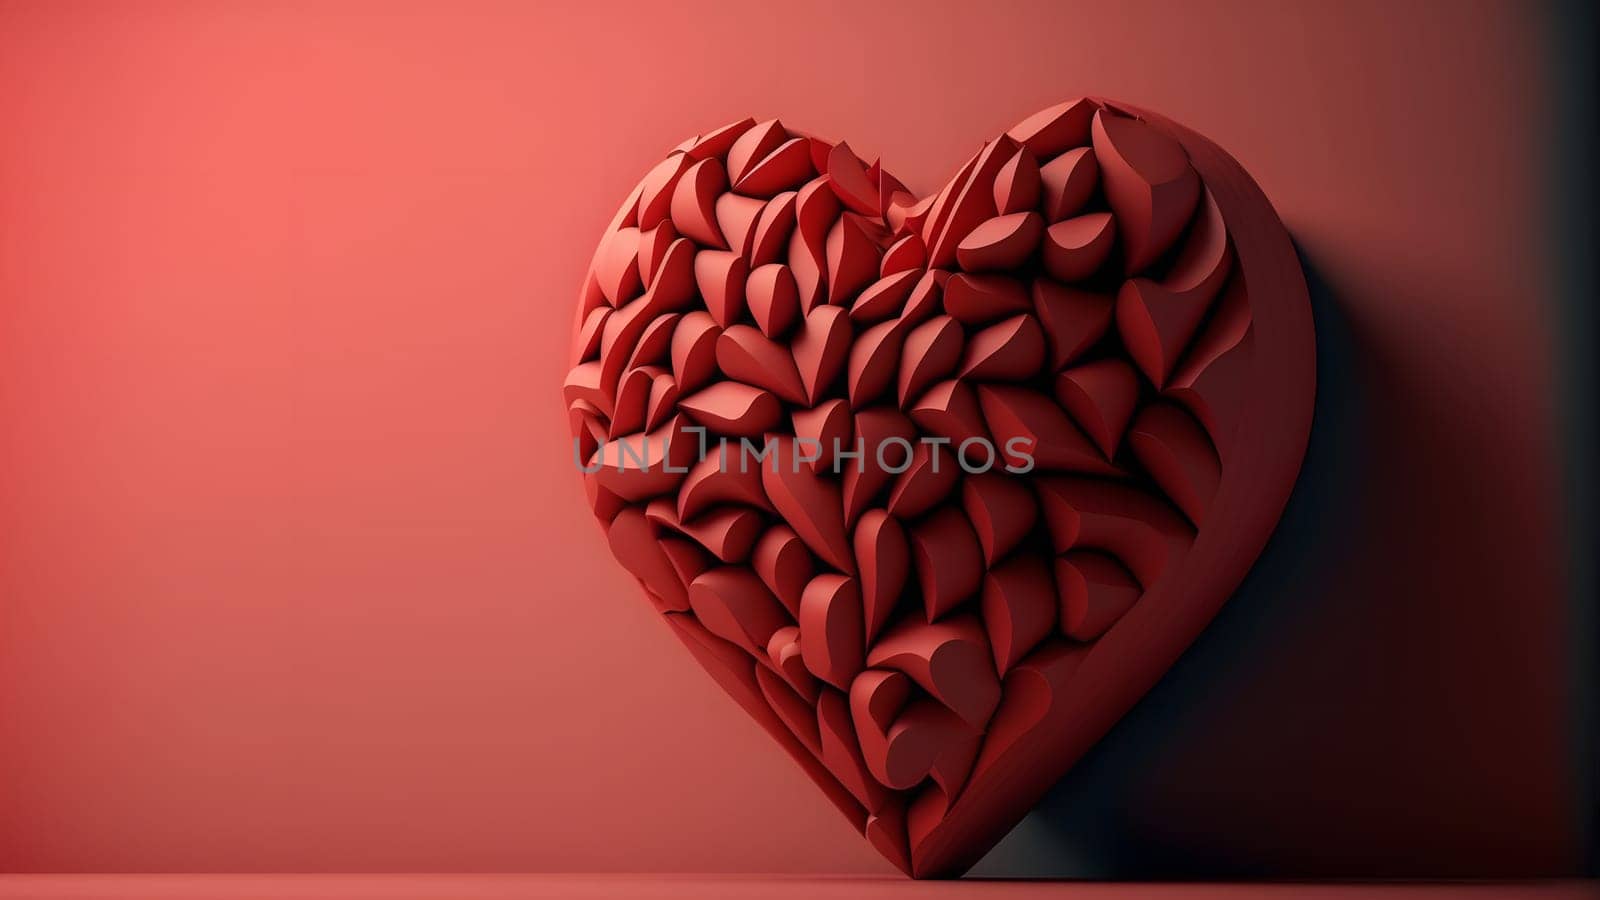 minimalistic valentines day background with heart symbol copy space at the left side, neural network generated art. Digitally generated image. Not based on any actual person, scene or pattern.